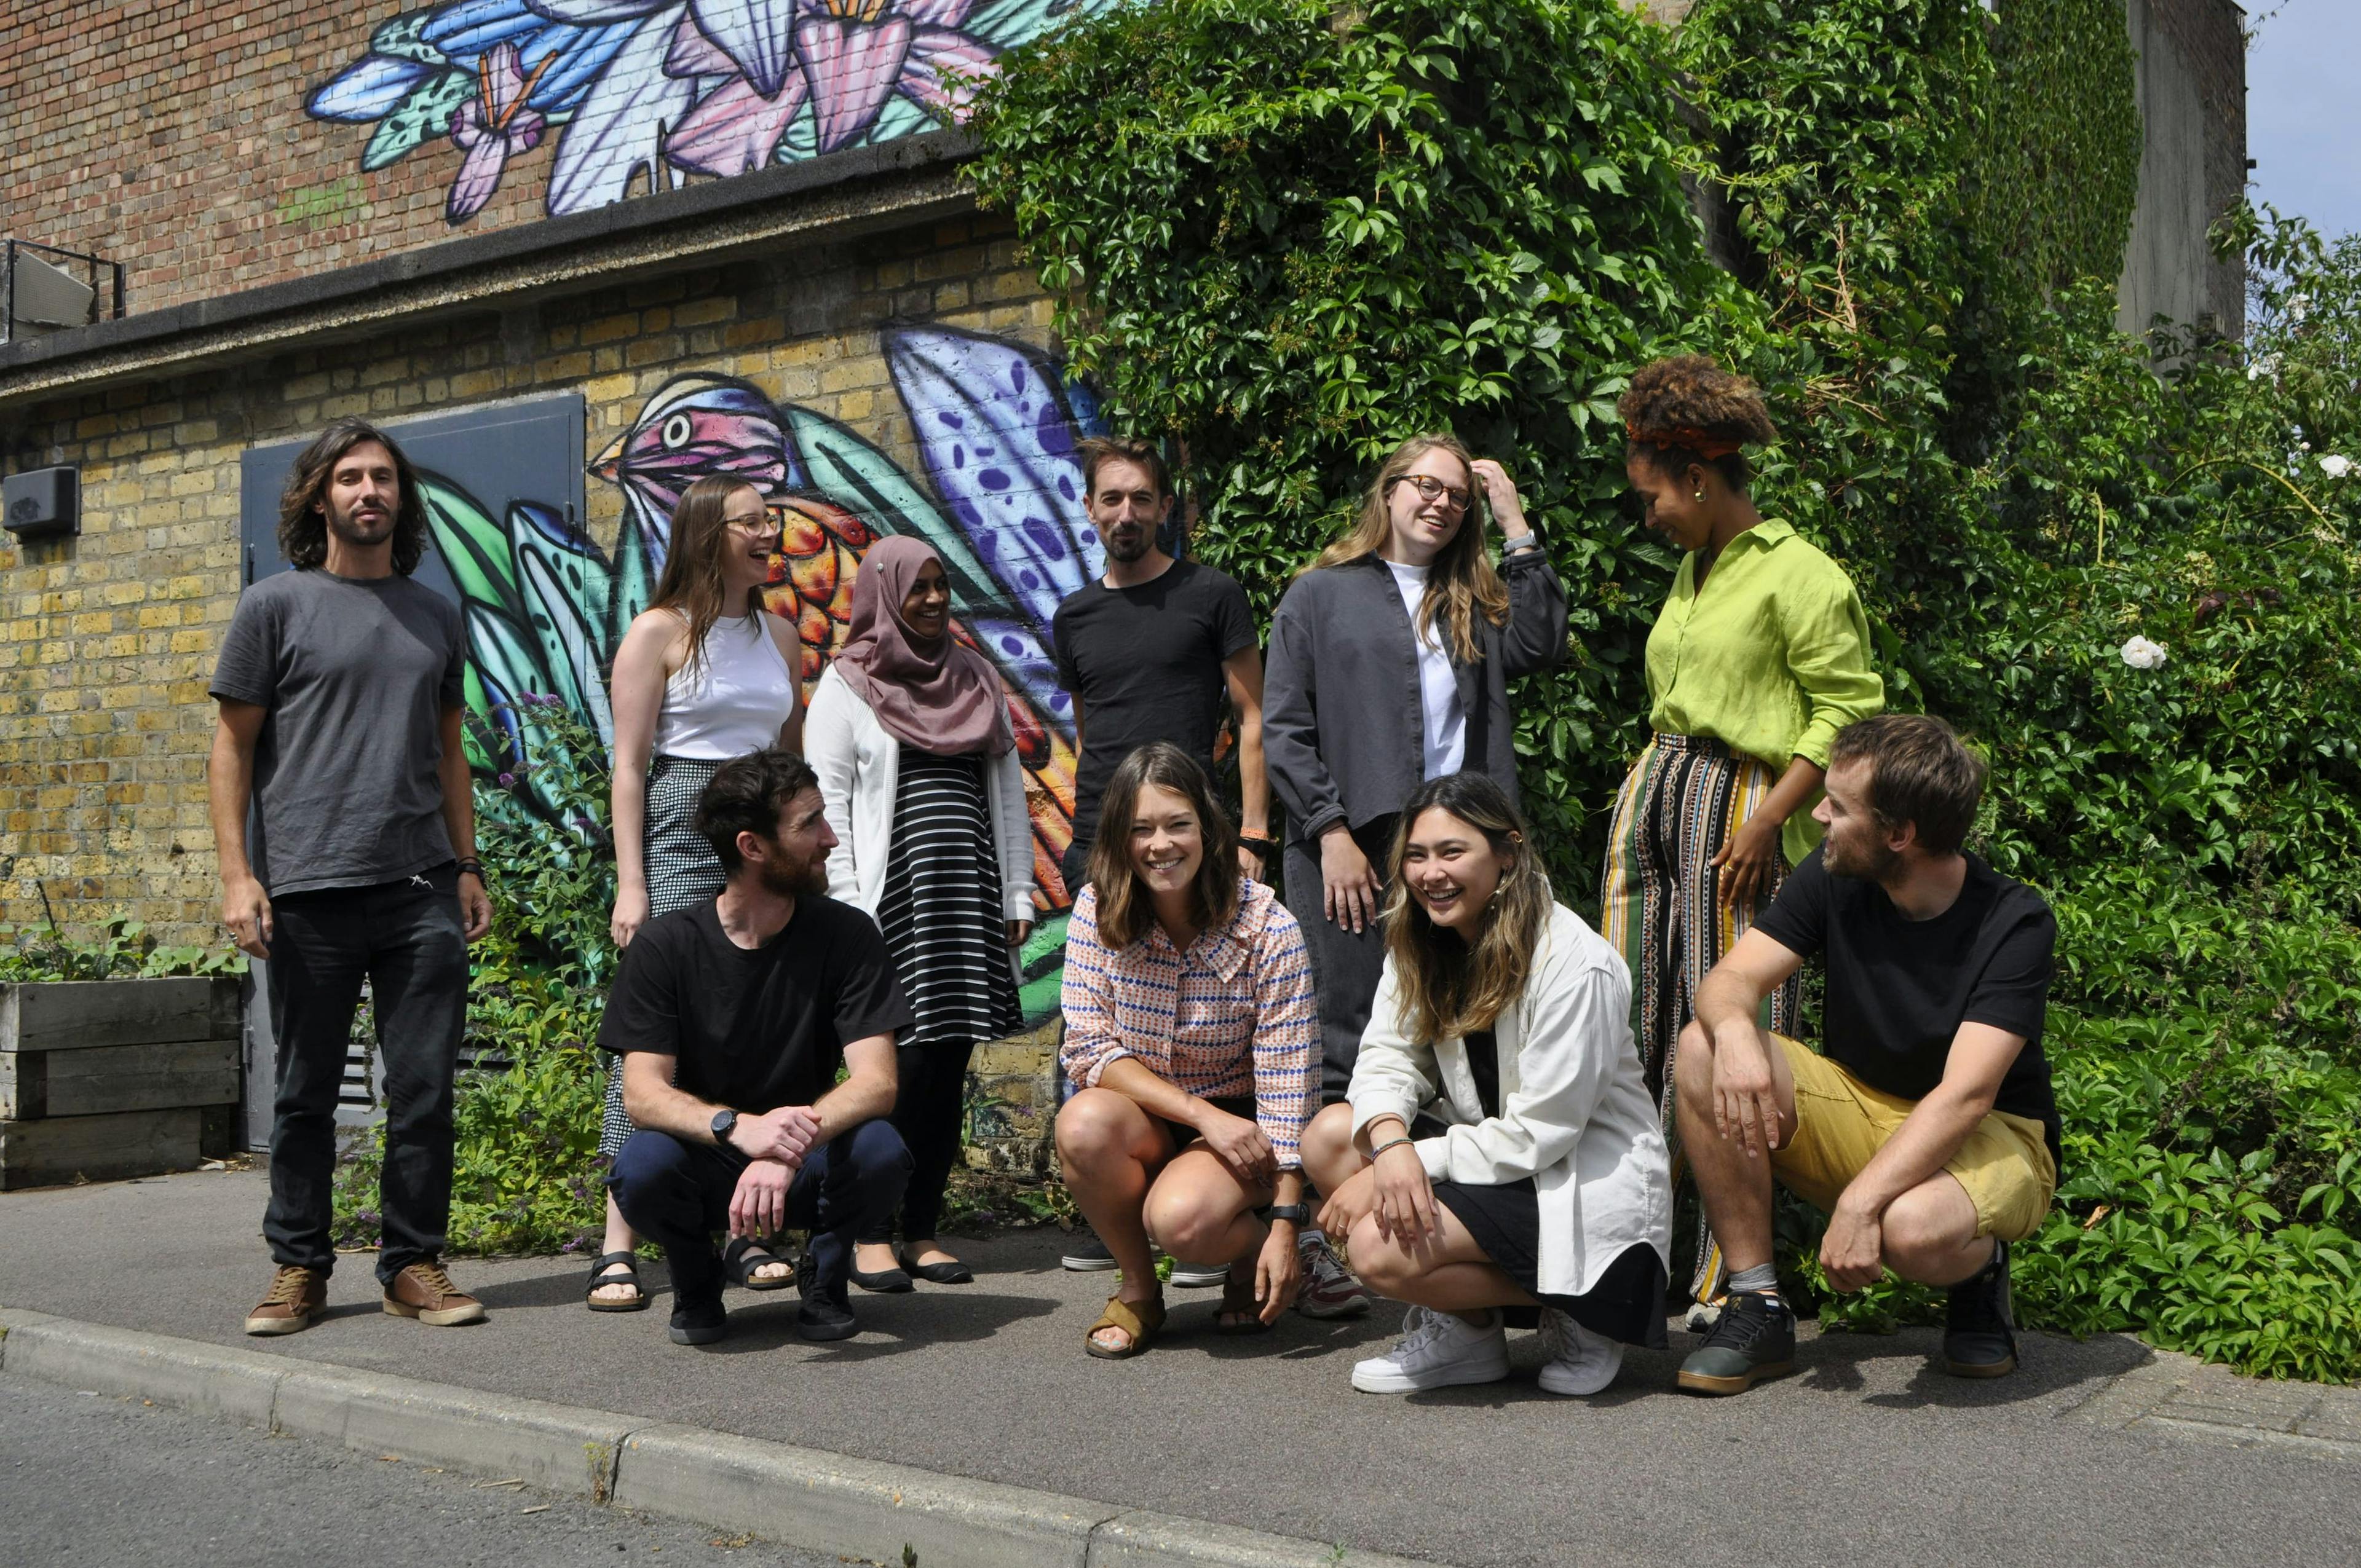 Studio Bark team with greenery in background